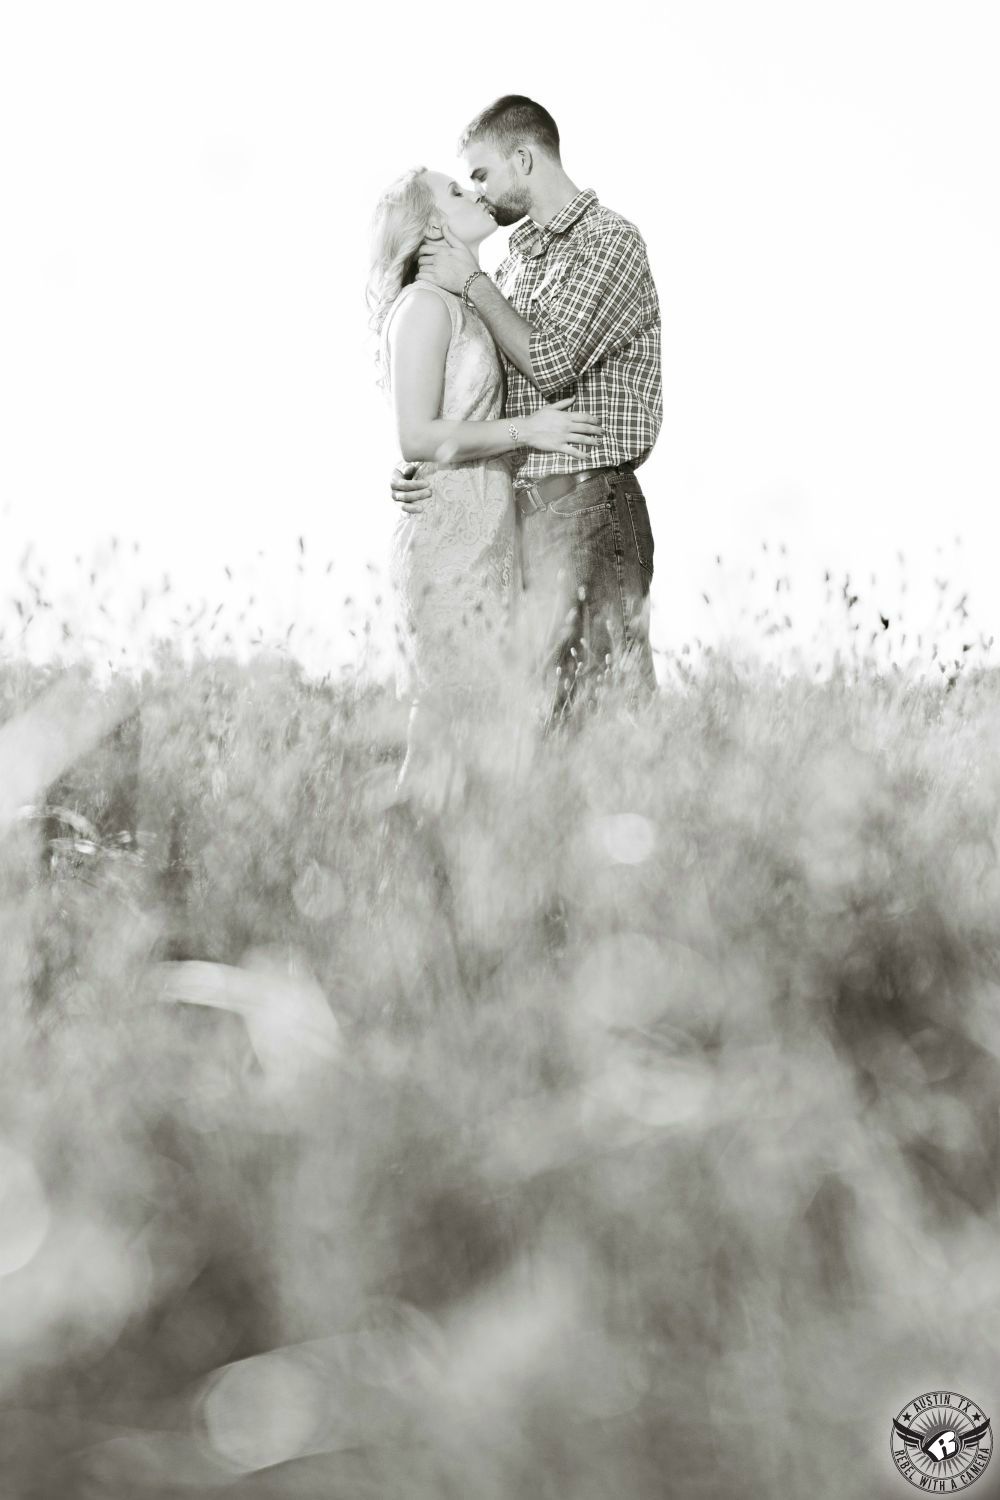 Flirty blond  girl wearing a light colored dress  is kissed and held tenderly by a dark haired guy wearing a black and white plaid long sleeve shirt and dark jeans in a field of golden wheat against a big Texas sky in this soft engagement photograph near Austin.